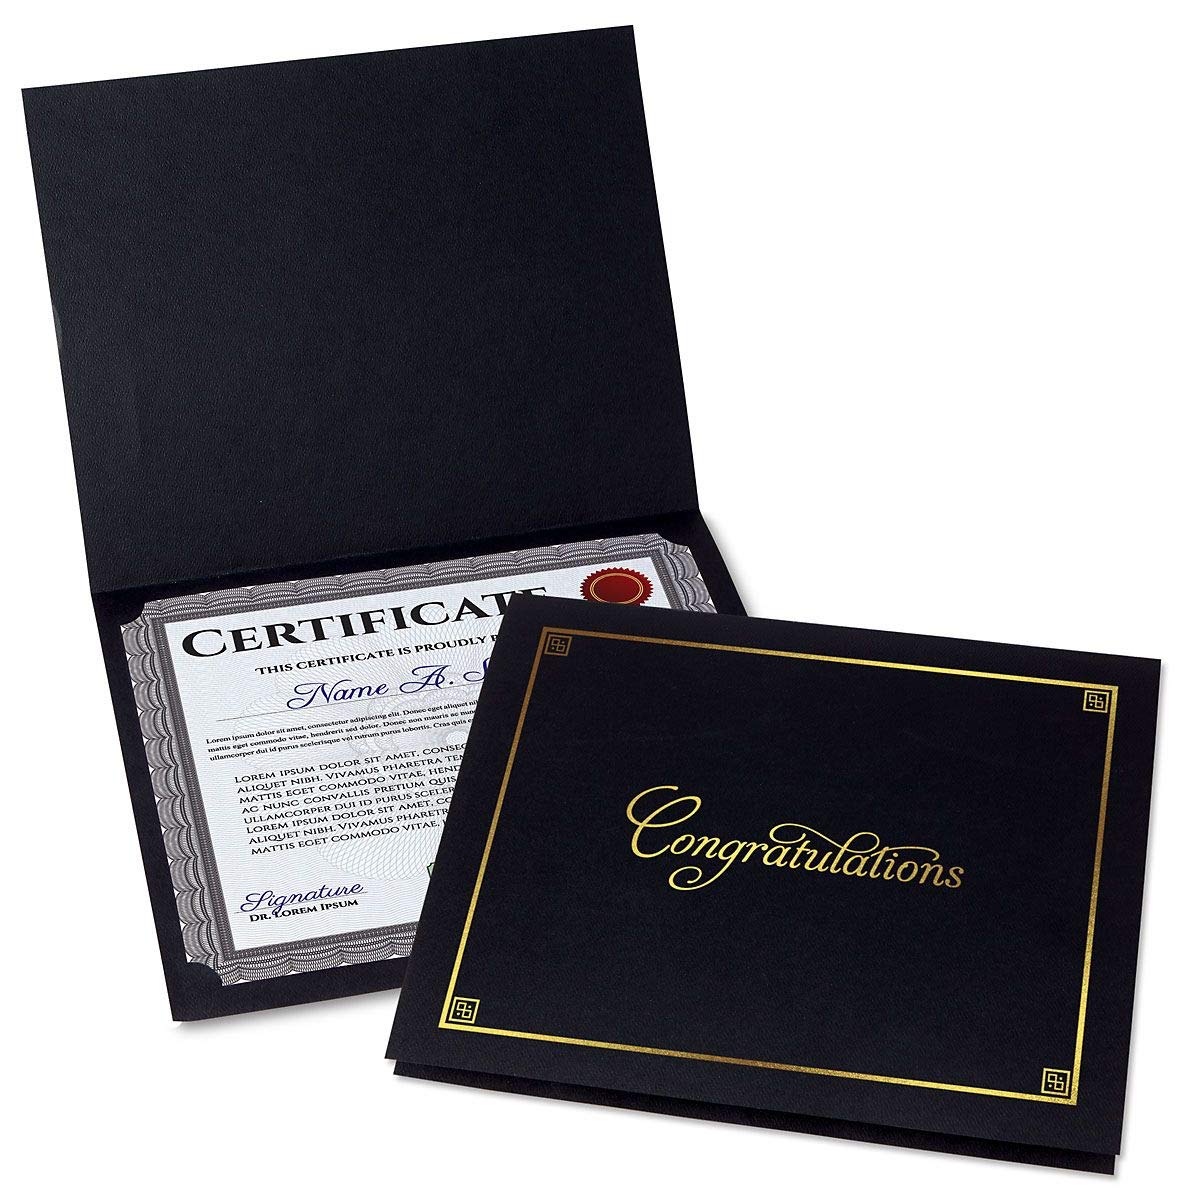 Congratulations Black & Gold Certificate Folders - Pack of 25, Linen Cover 80 lb. Stock, Folded, Die-Cut Corners, for Office, Business Awards, Grad...